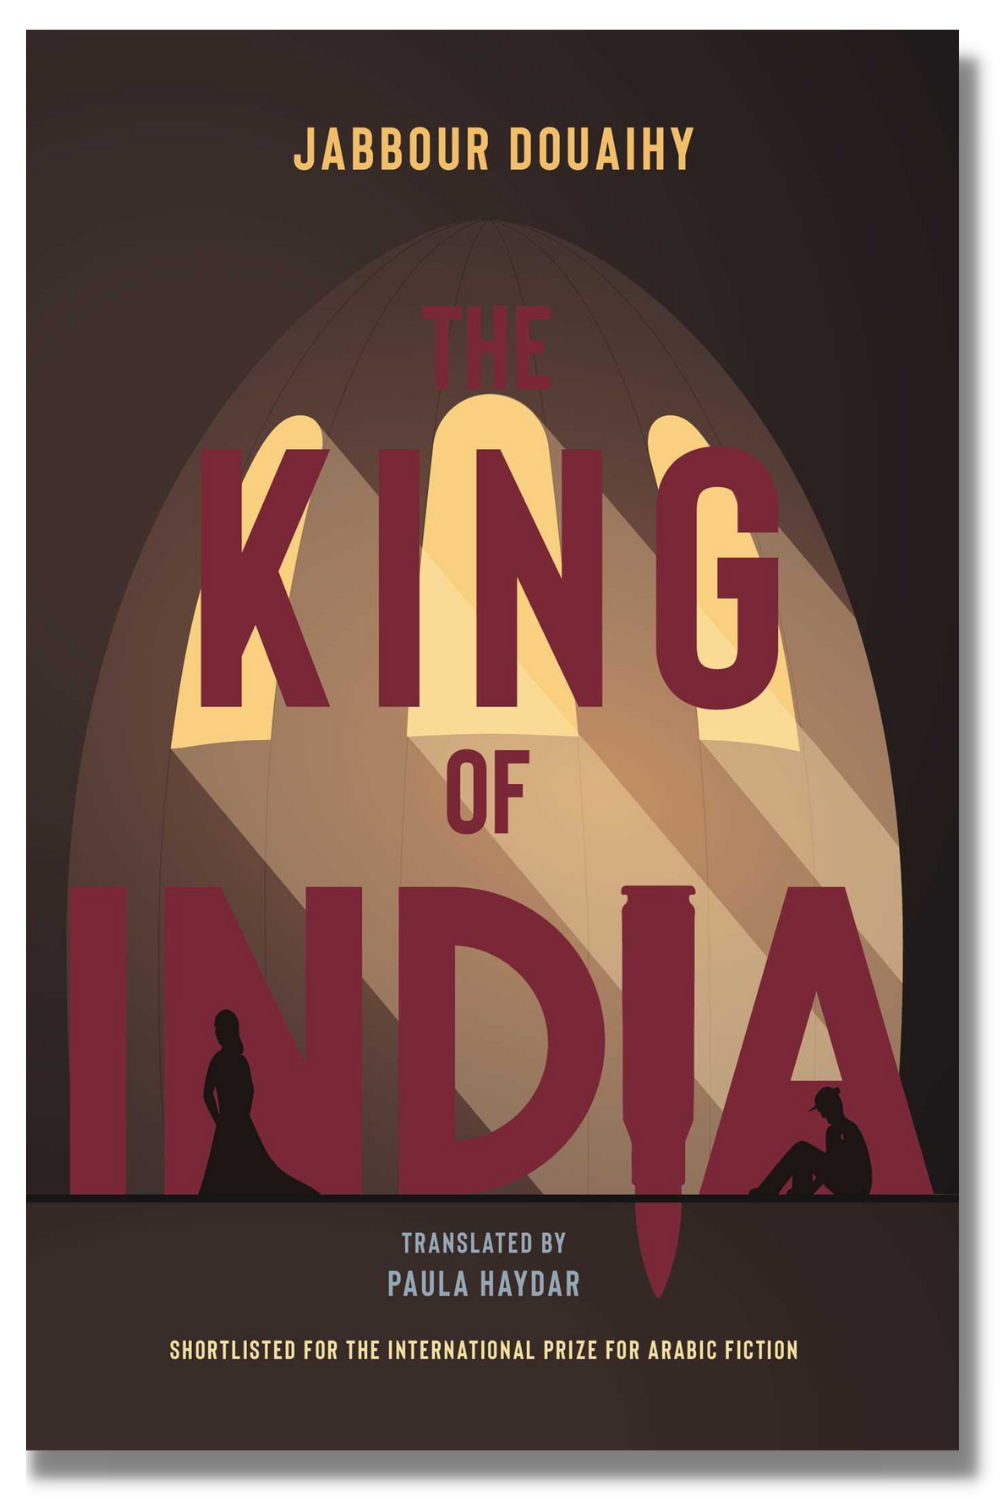 The cover of Jabbour Douaihy's "The King of India," tr. Paula Haydar